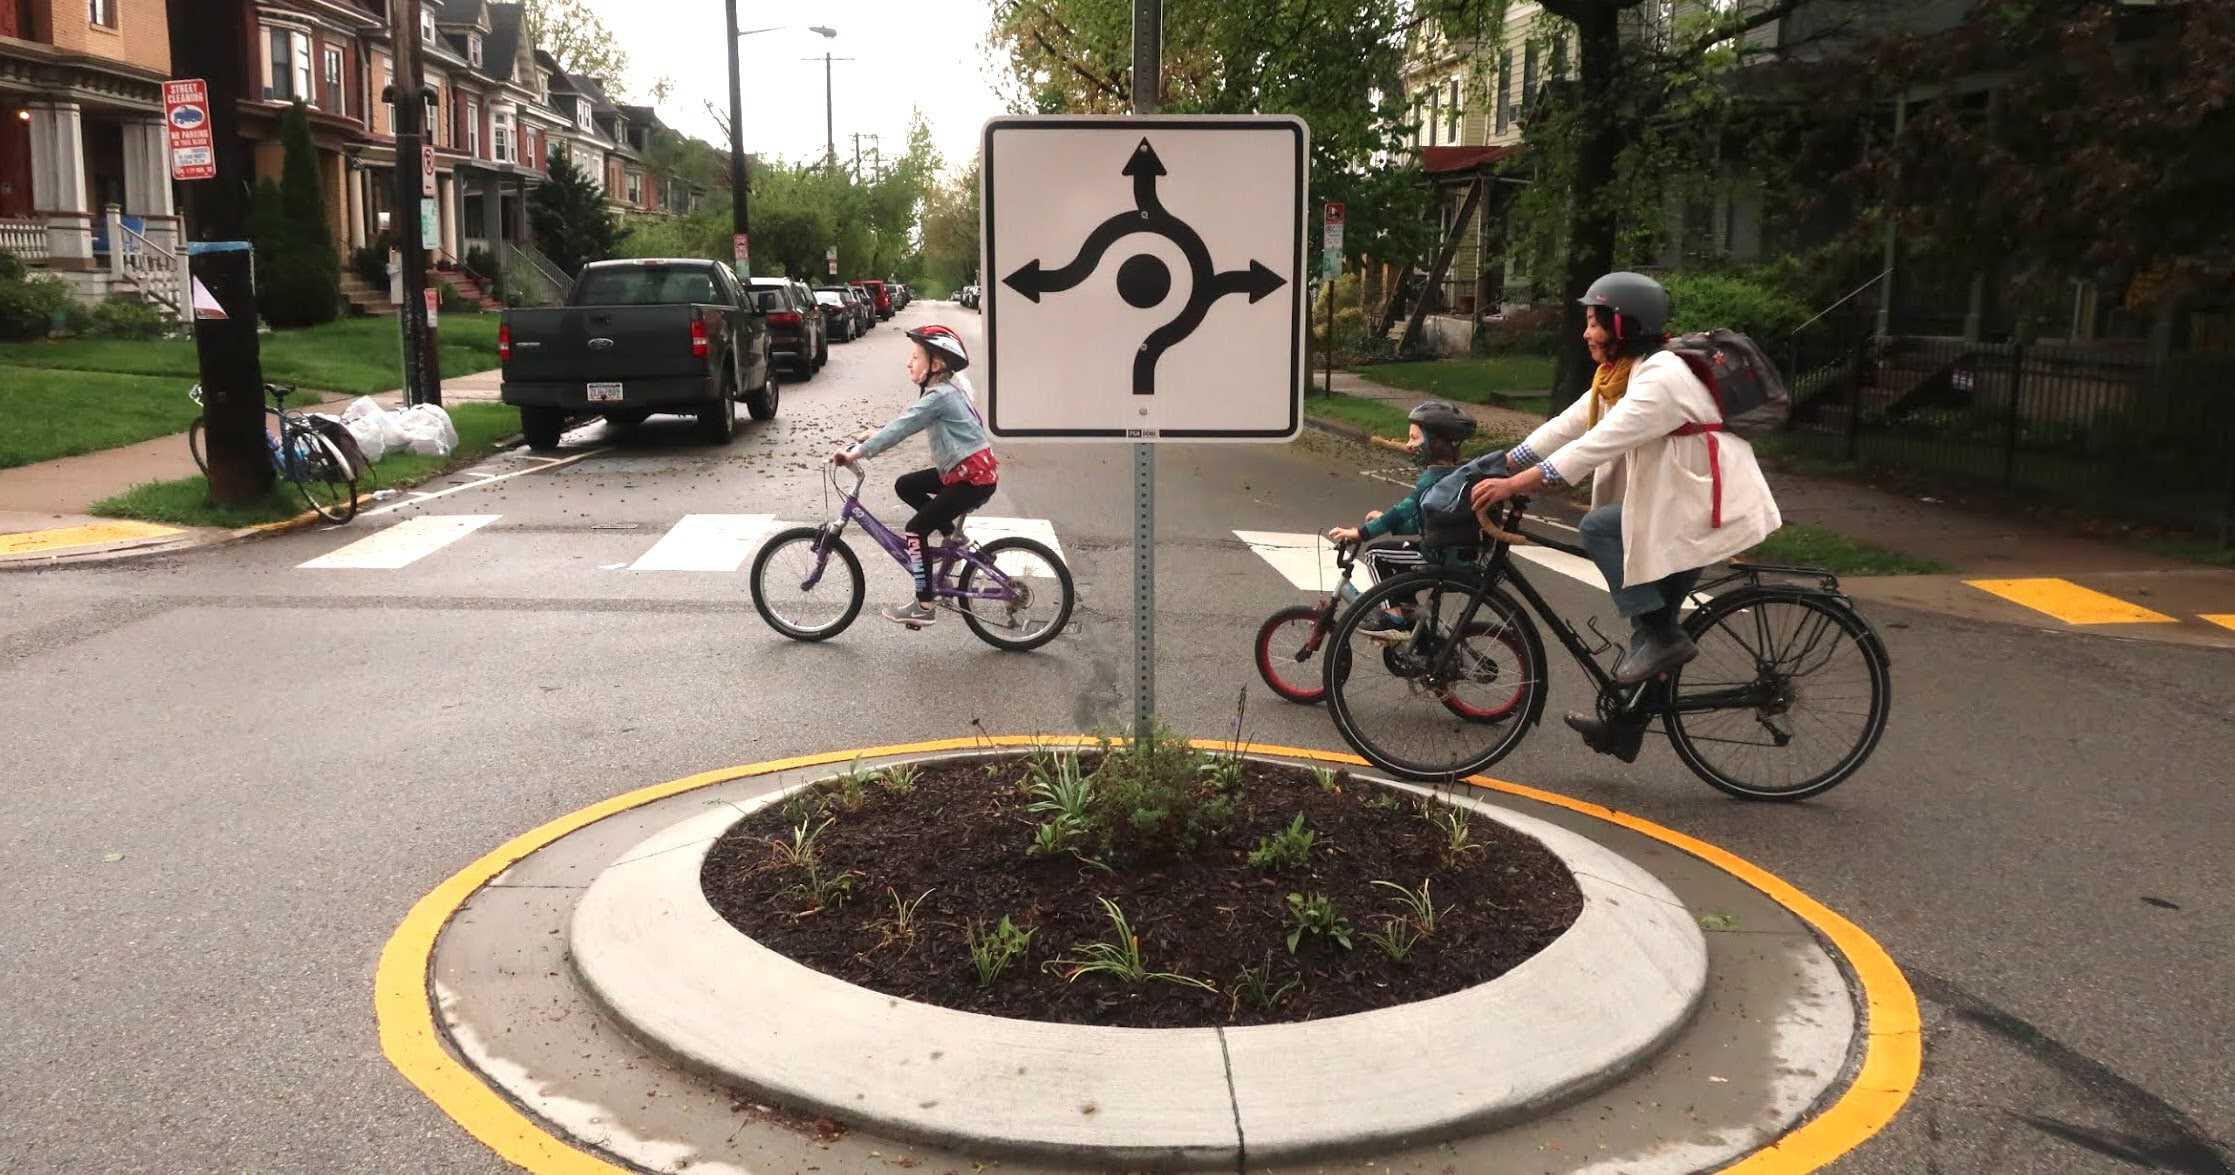 Photograph of two children and an adult woman riding their bikes on a street with a roundabout. 